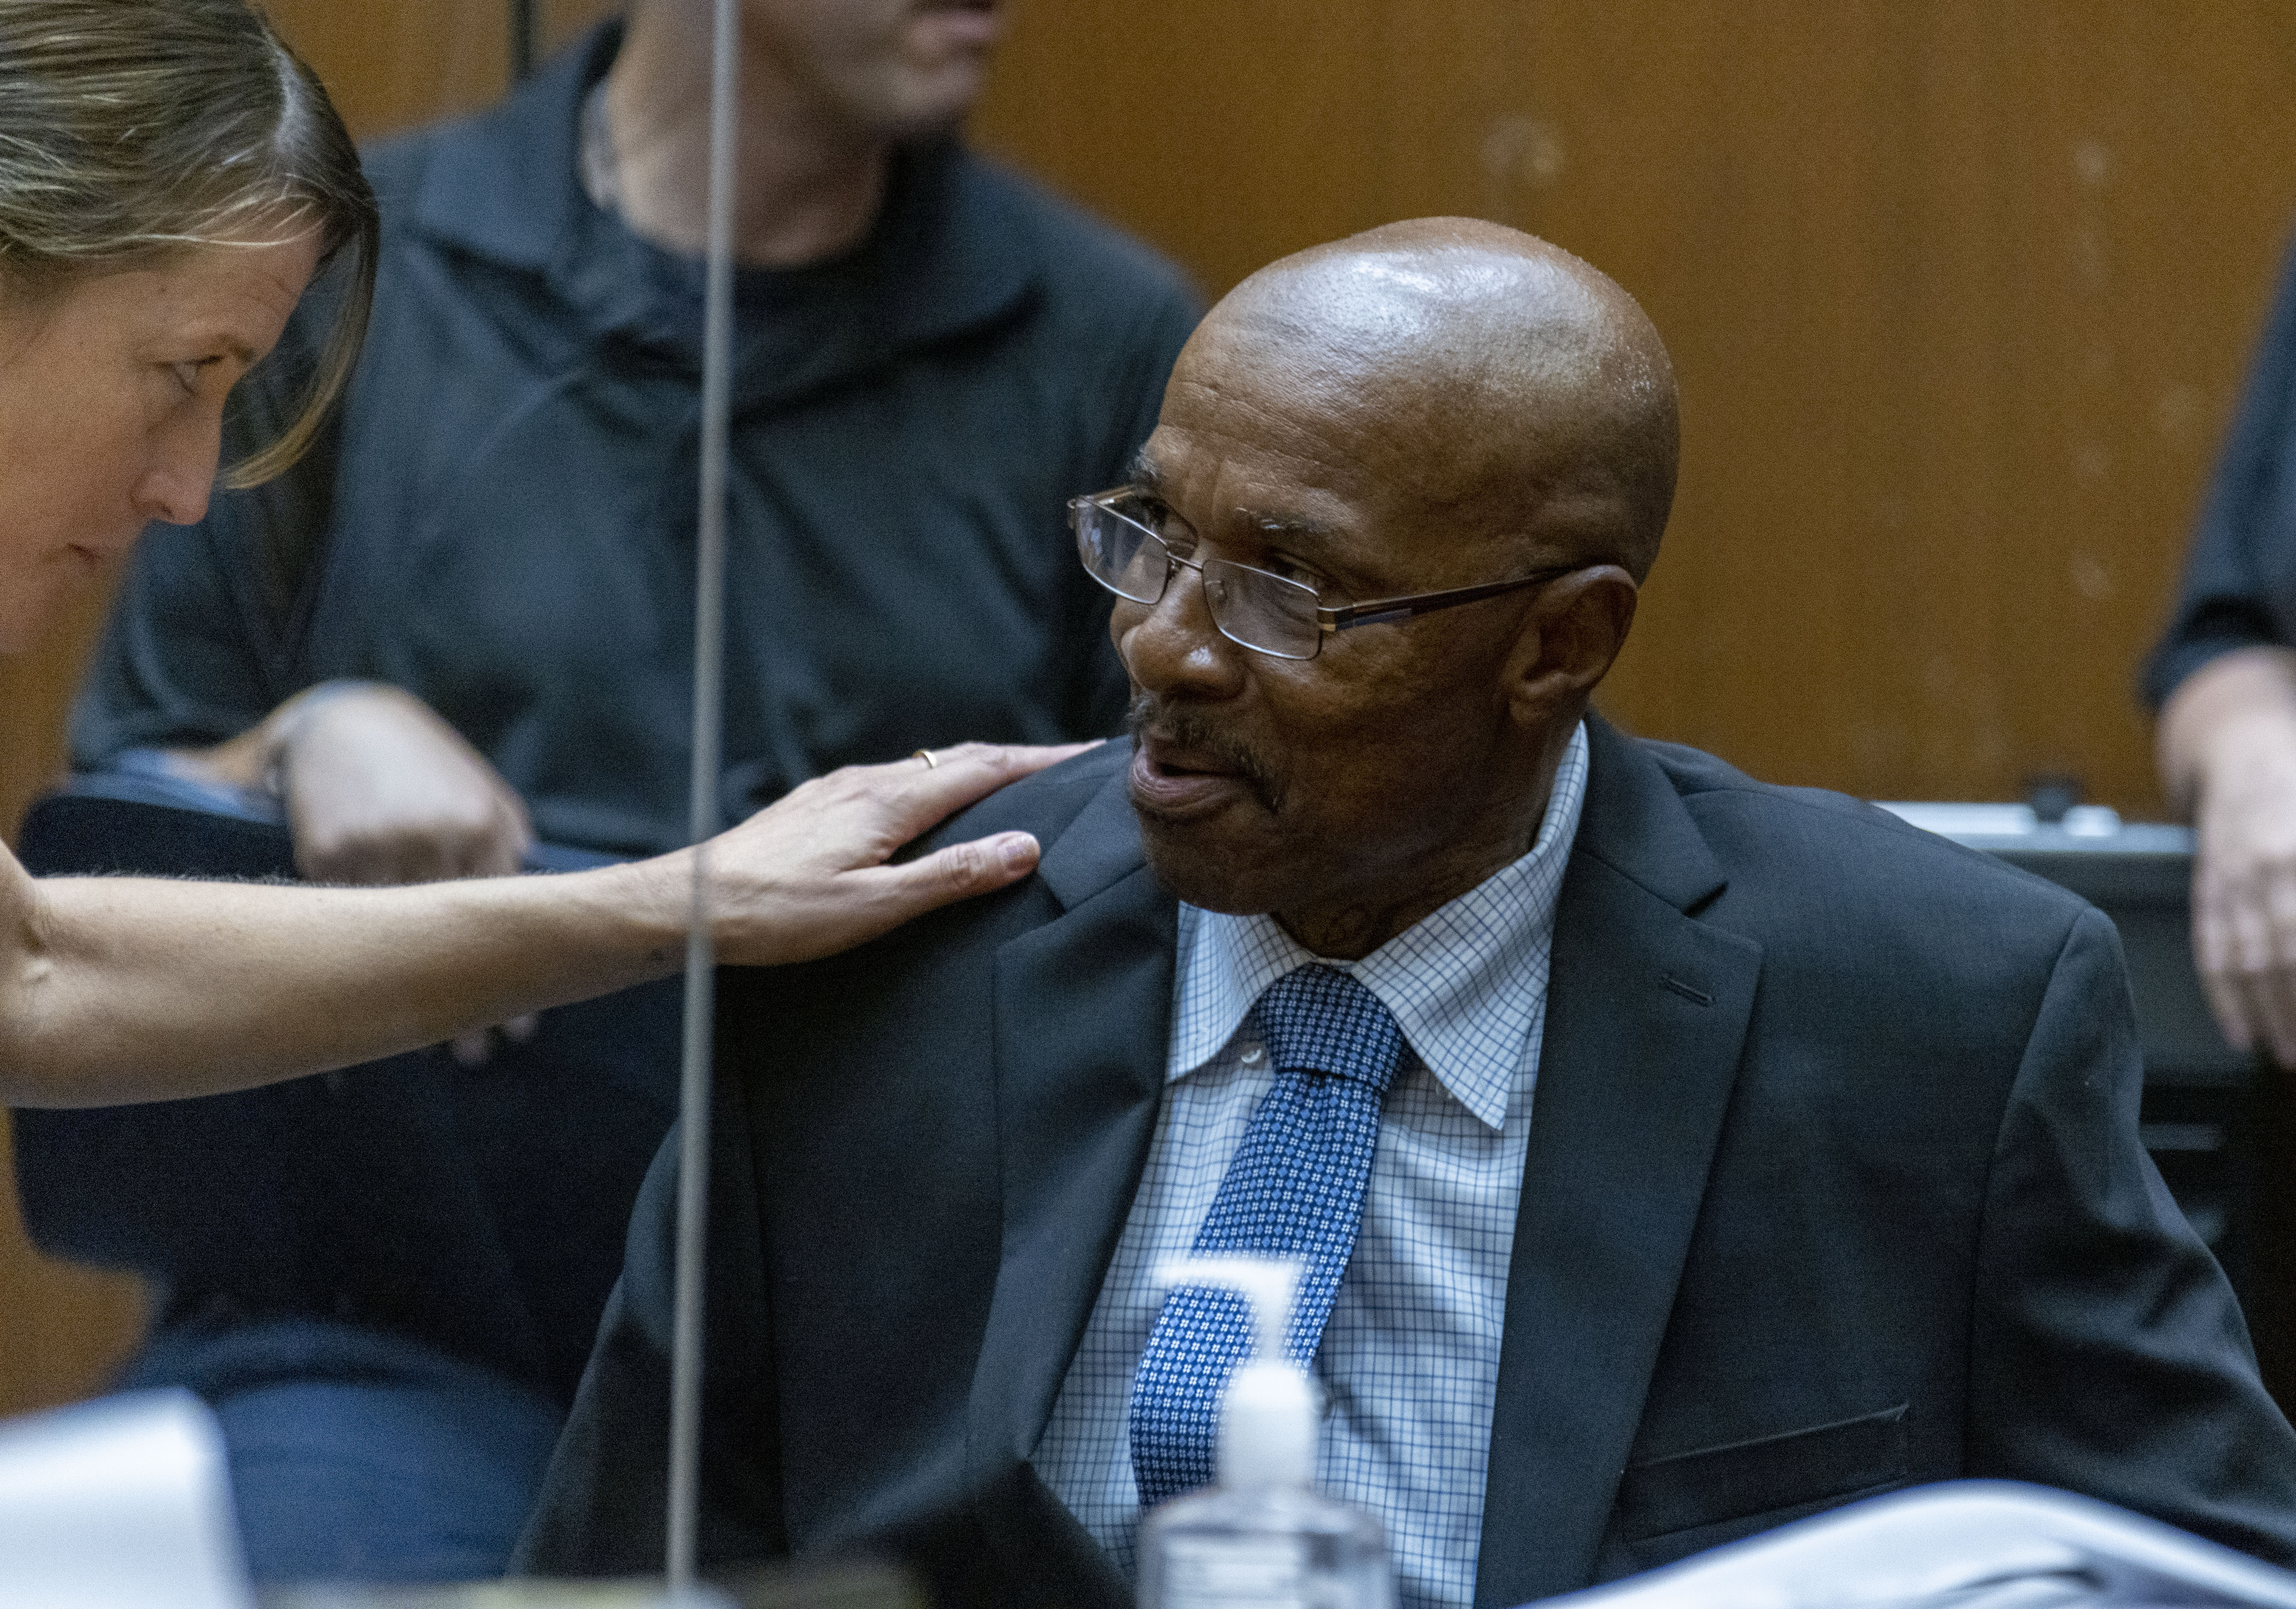 Los Angeles, CA- 102022- Maurice Hastings at a hearing at a Los Angeles Superior Court on October 20, 2022 where a judge dismissed his conviction for murder after new DNA evidence exonerated him.